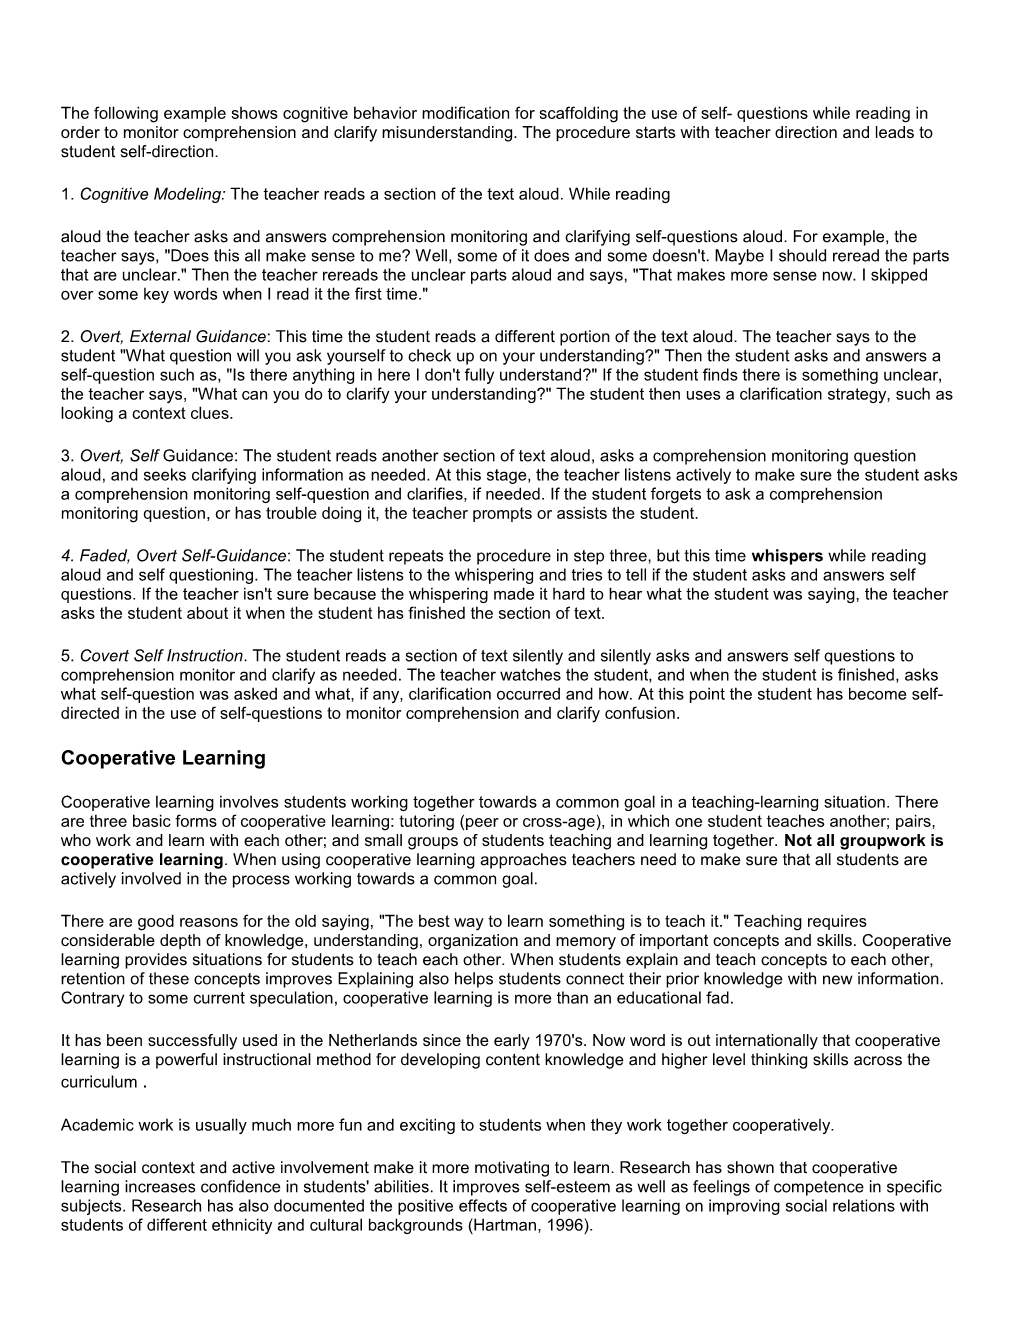 Chapter 3 Scaffolding & Cooperative Learning